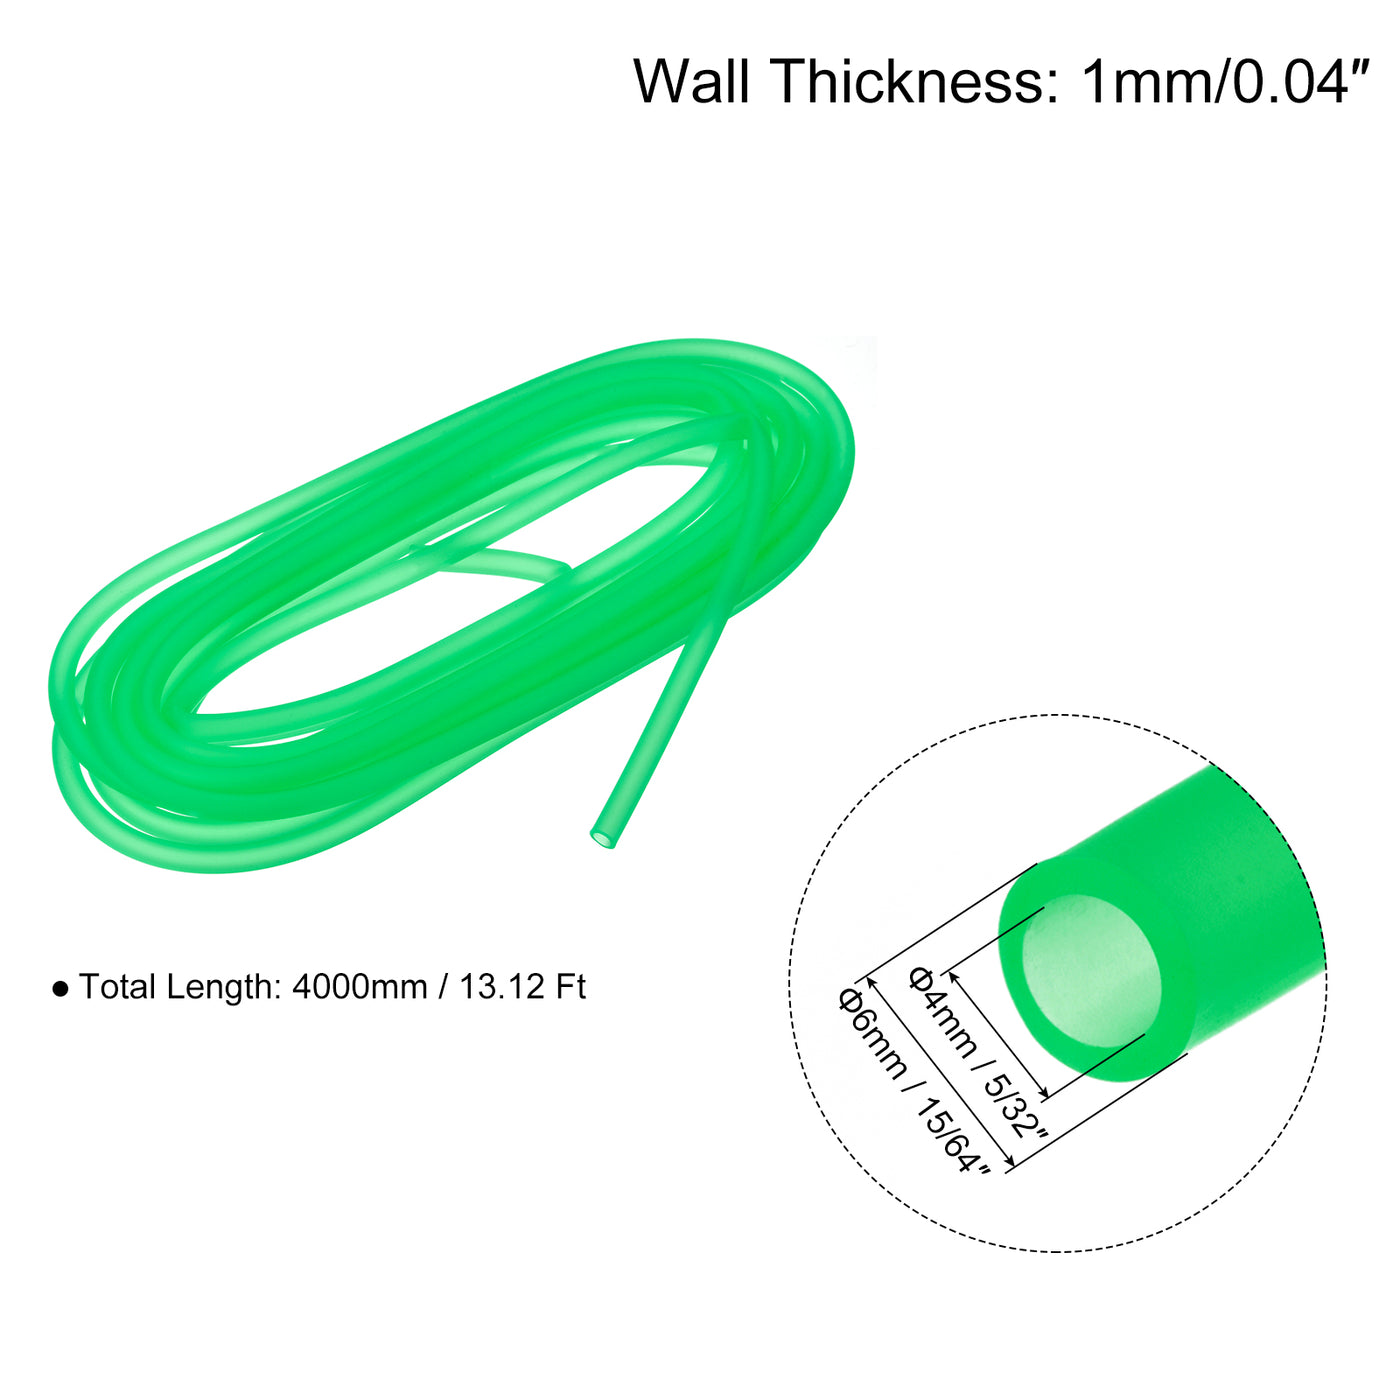 uxcell Uxcell Silicone Tubing 5/32" ID, 15/64" OD 1Pcs 13.12 Ft for Pump Transfer, Grass Green